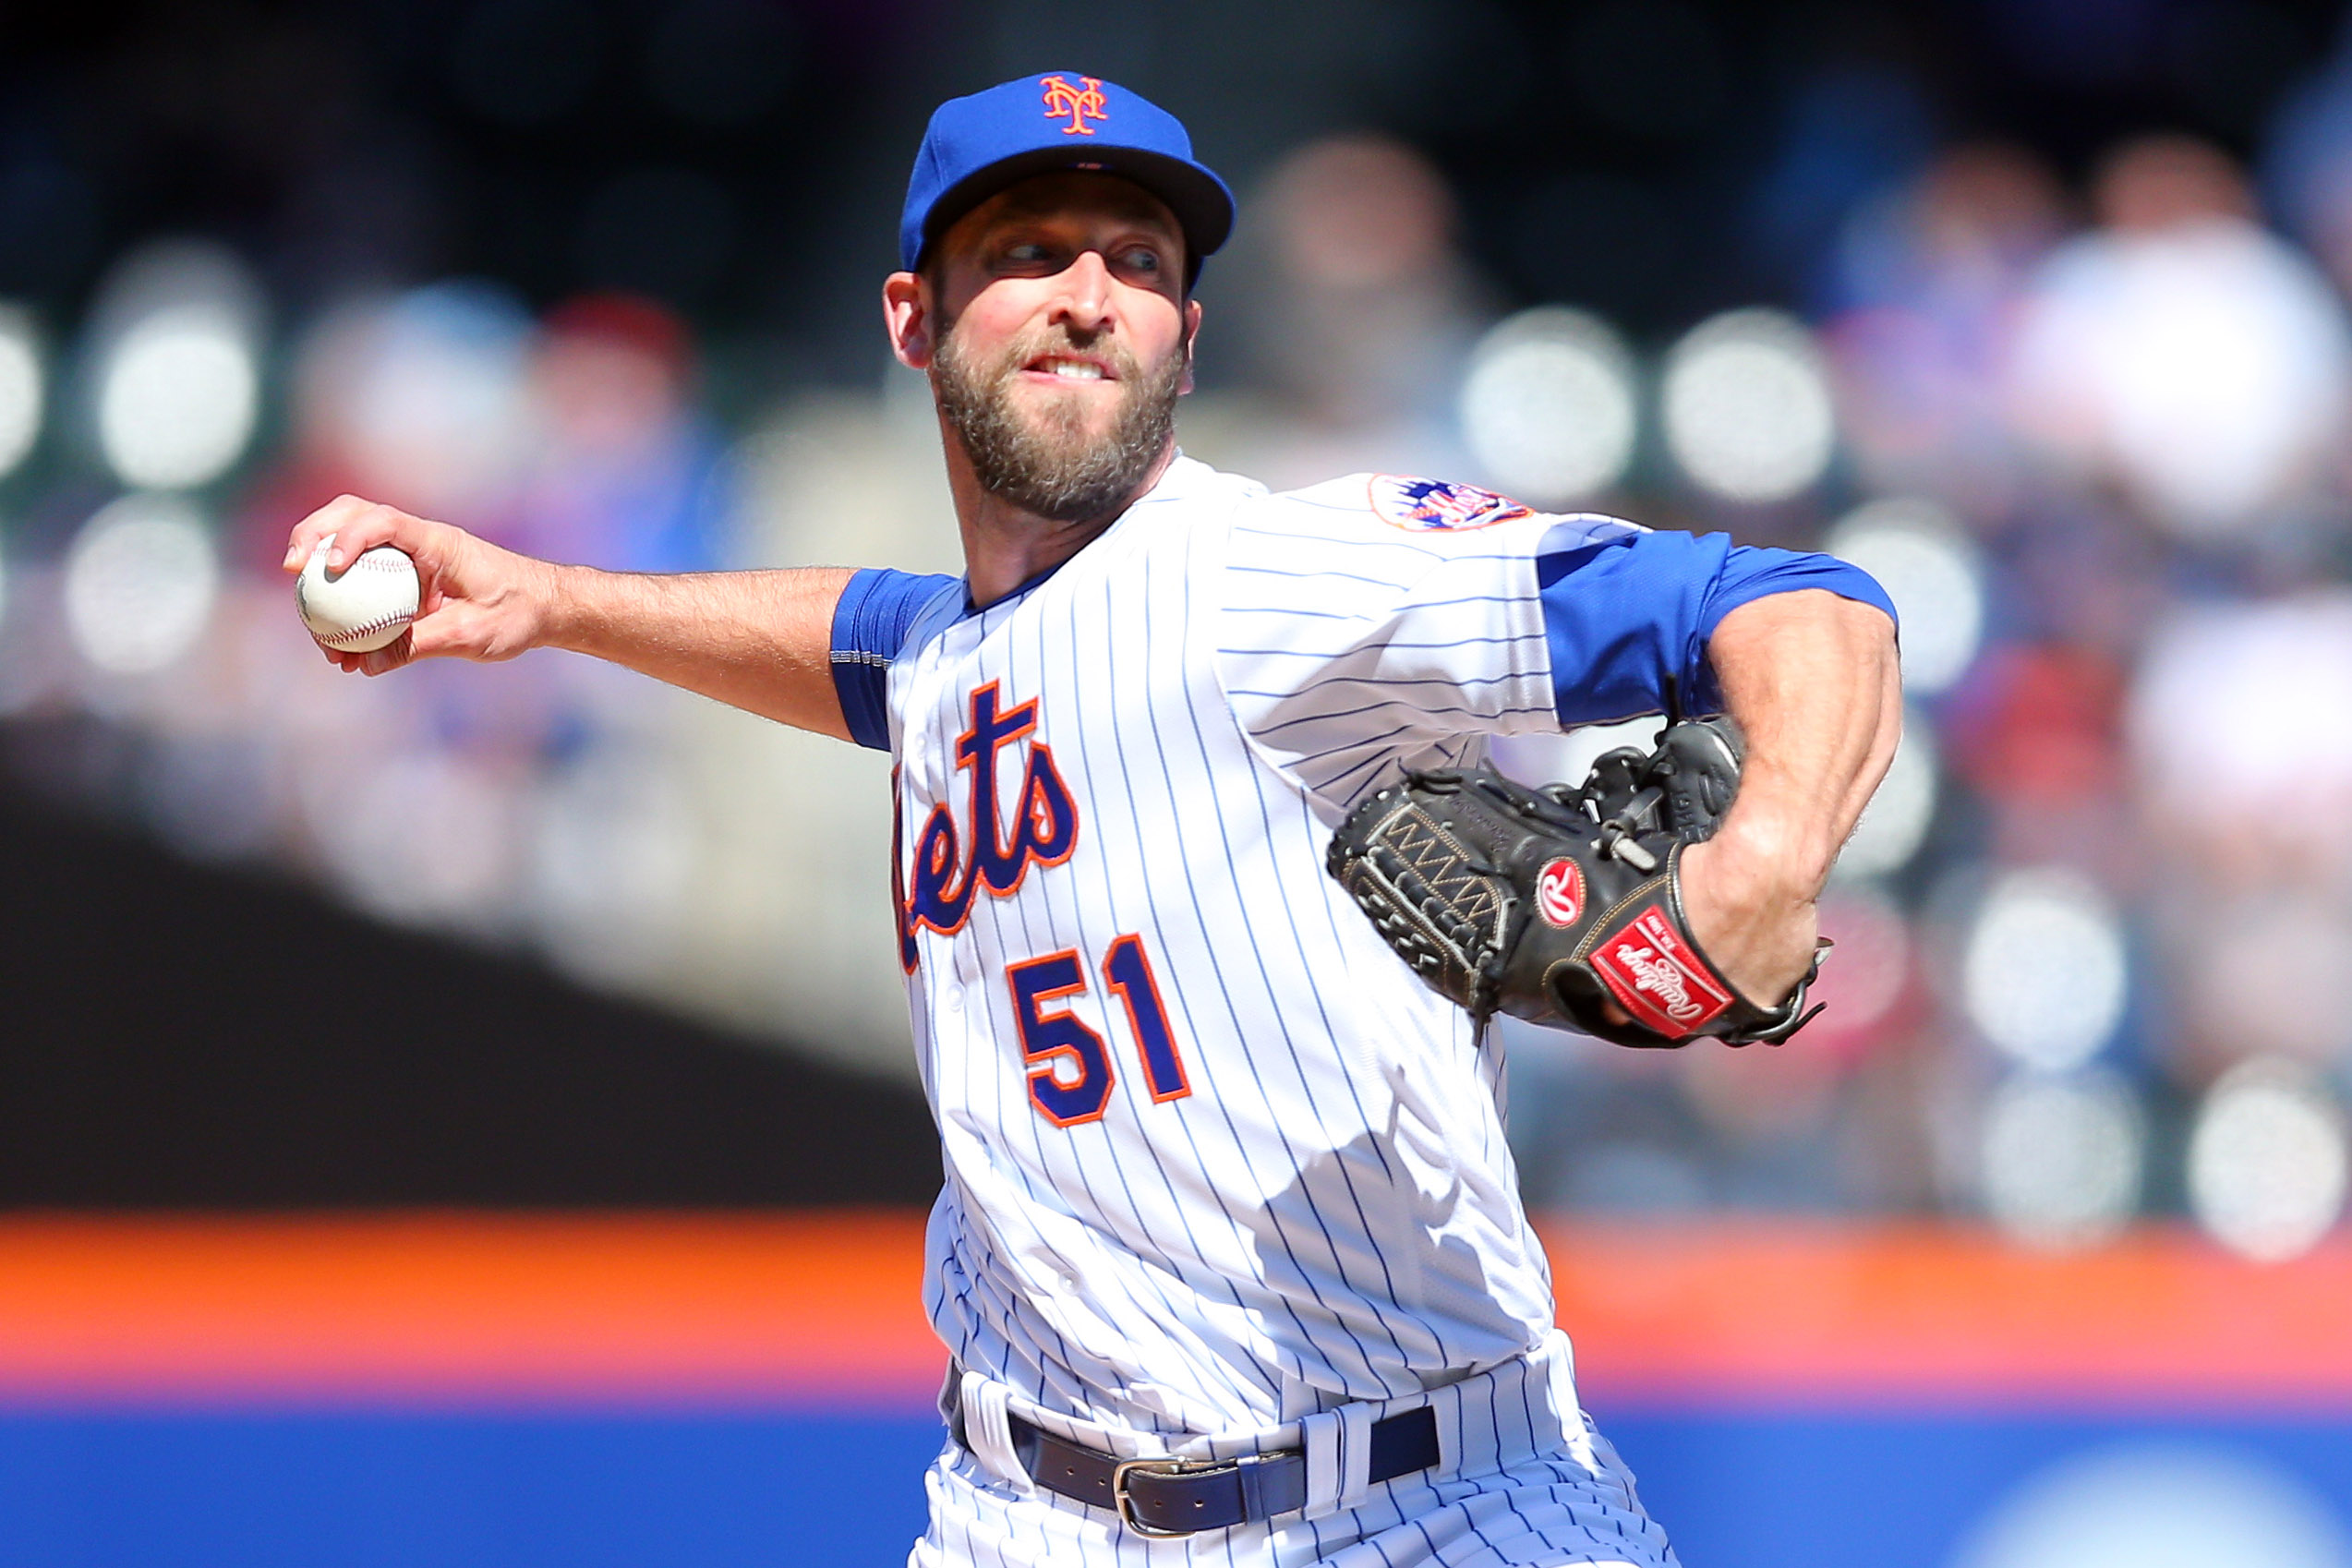 Mets Get Putz in Trade - The New York Times